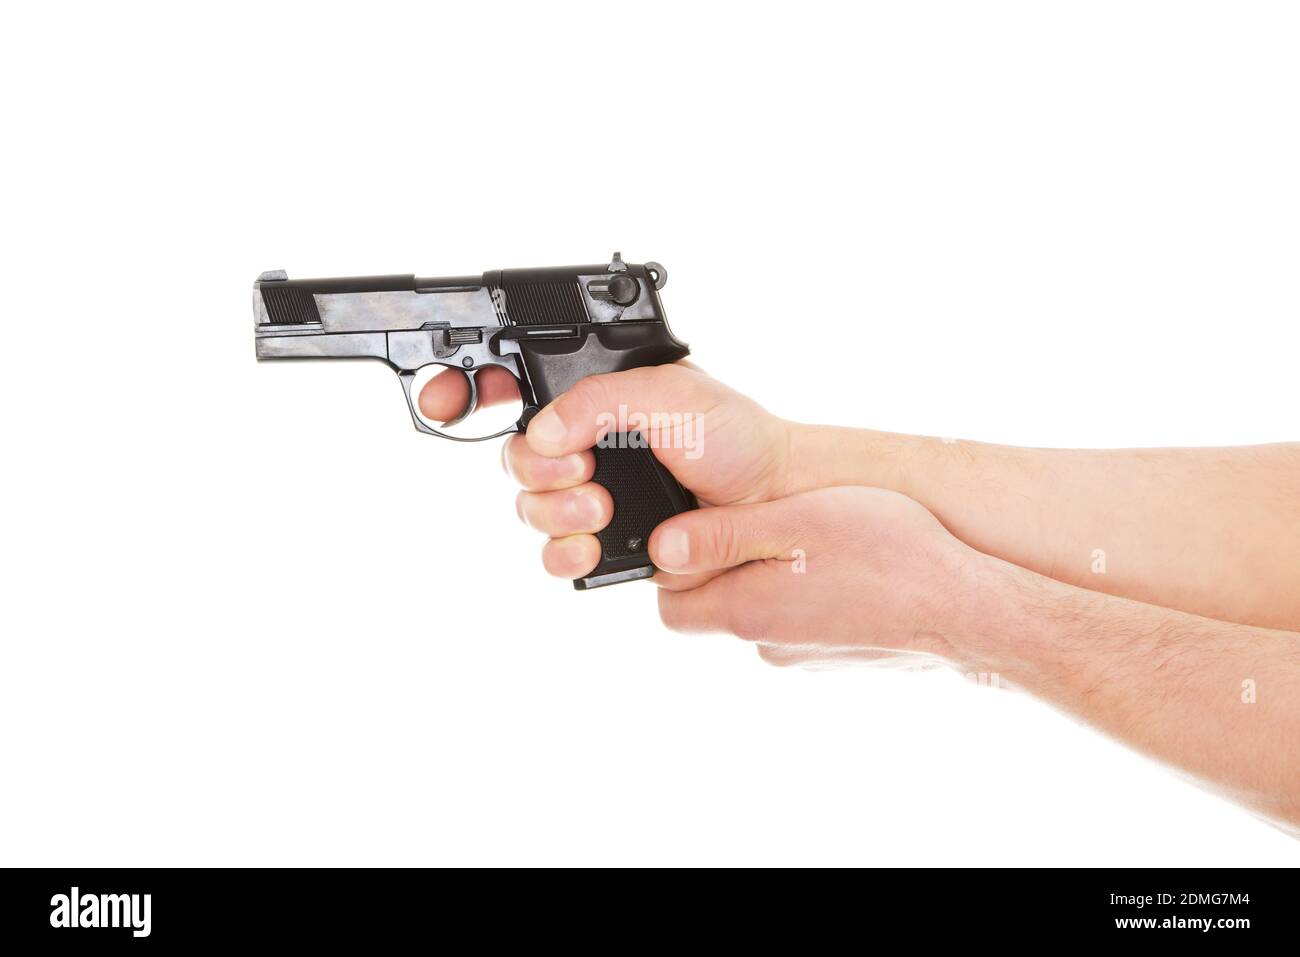 Close-up Of Hands Holding Gun Over White Background Stock Photo - Alamy